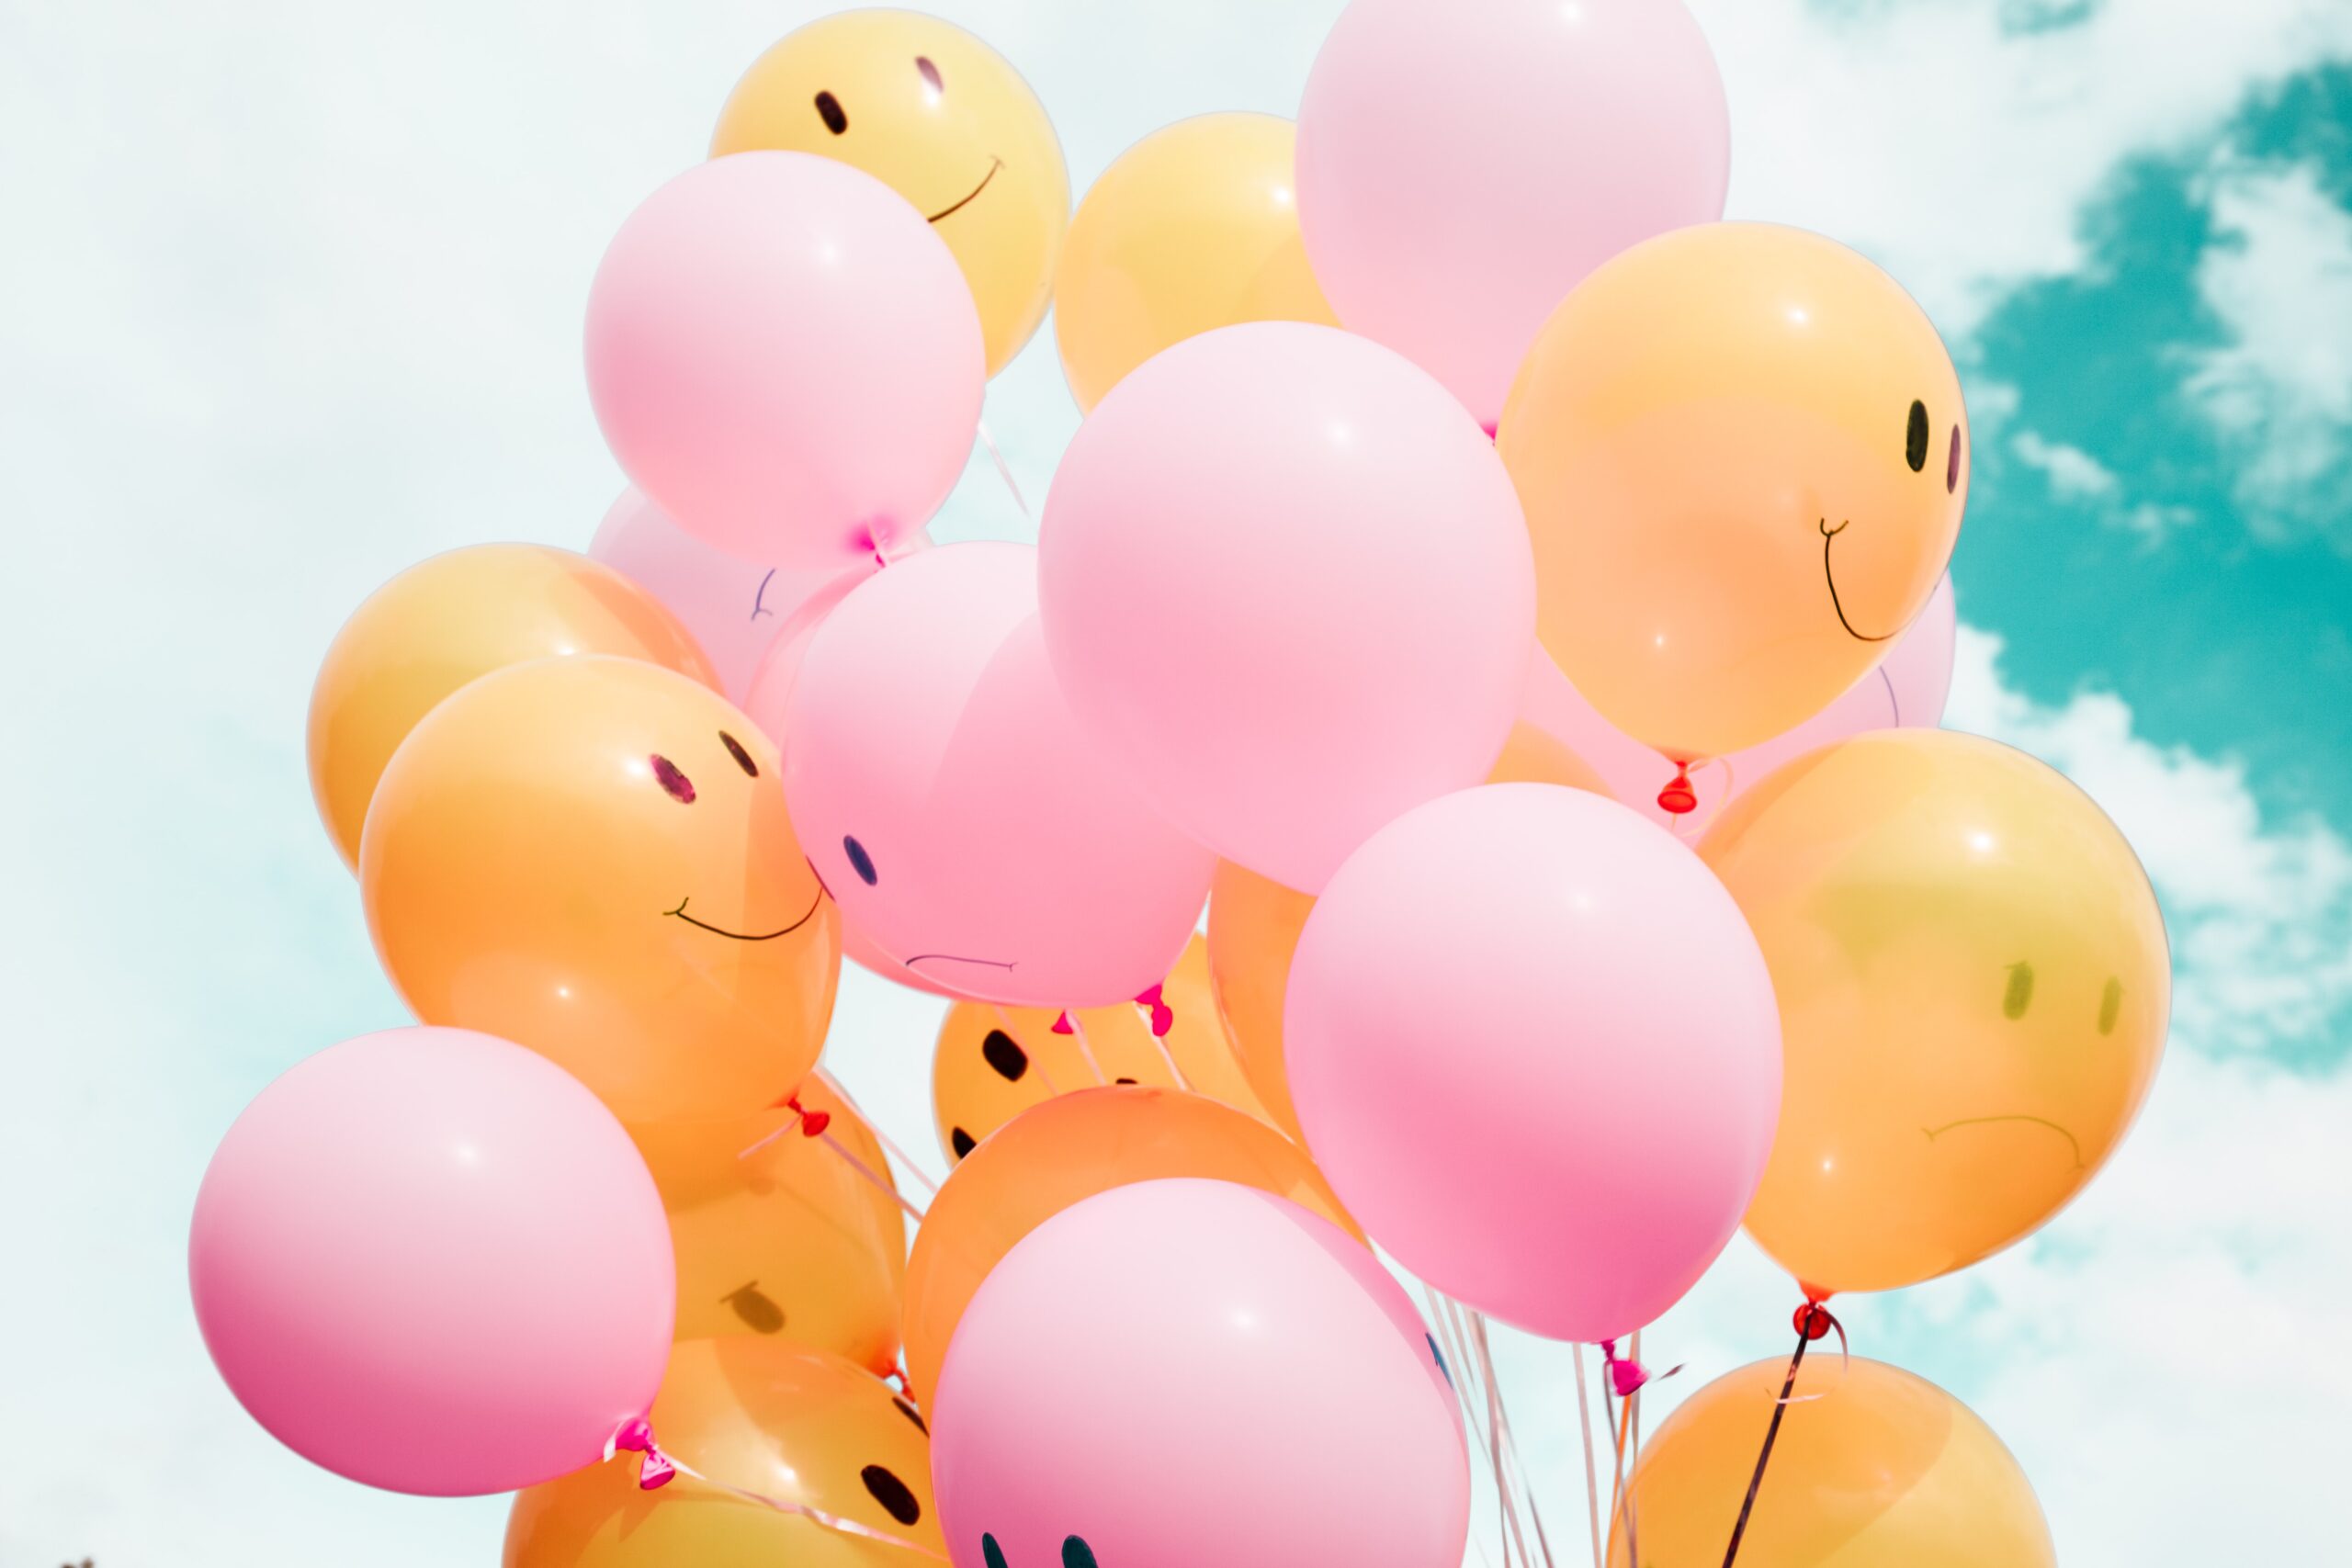 Balloons with smiling and frowning faces on them.